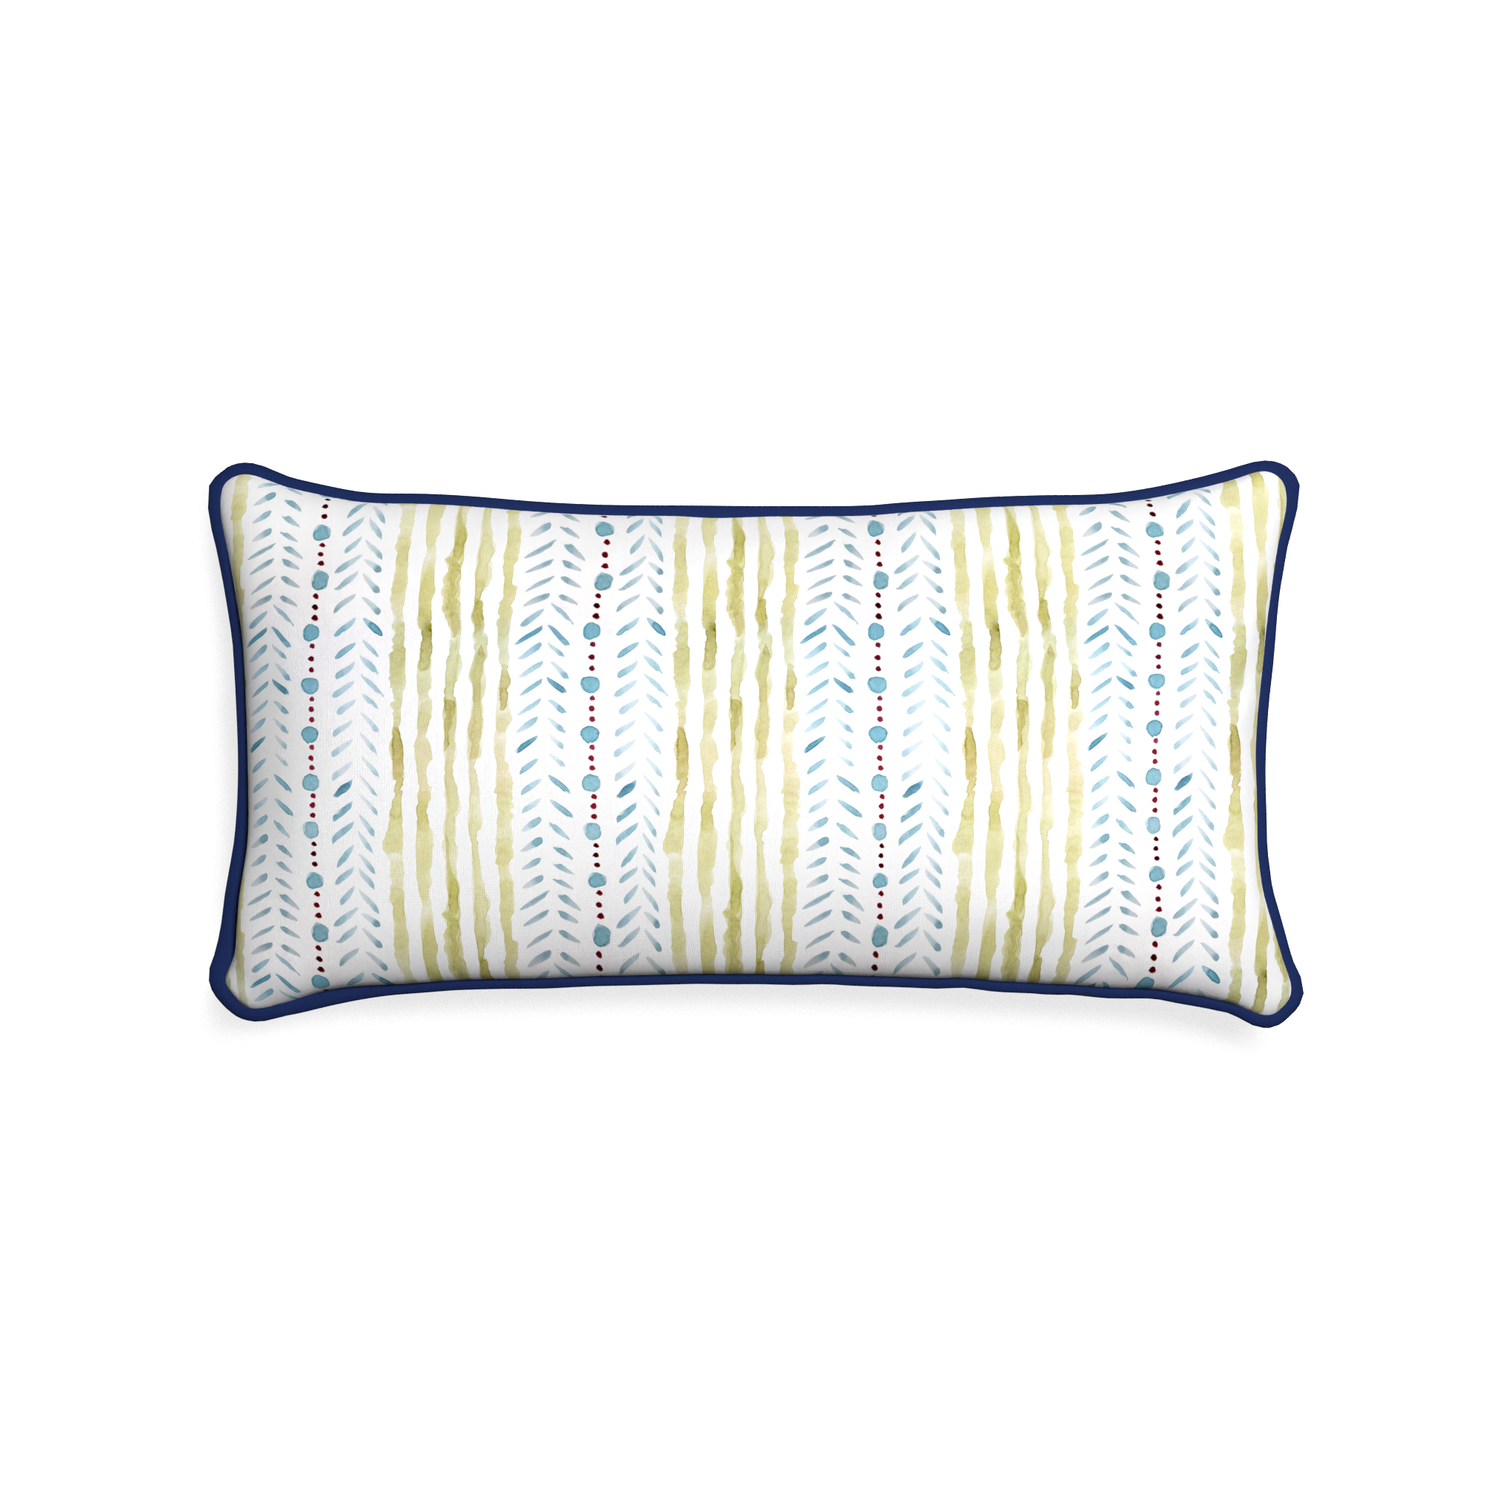 Midi-lumbar julia custom blue & green stripedpillow with midnight piping on white background